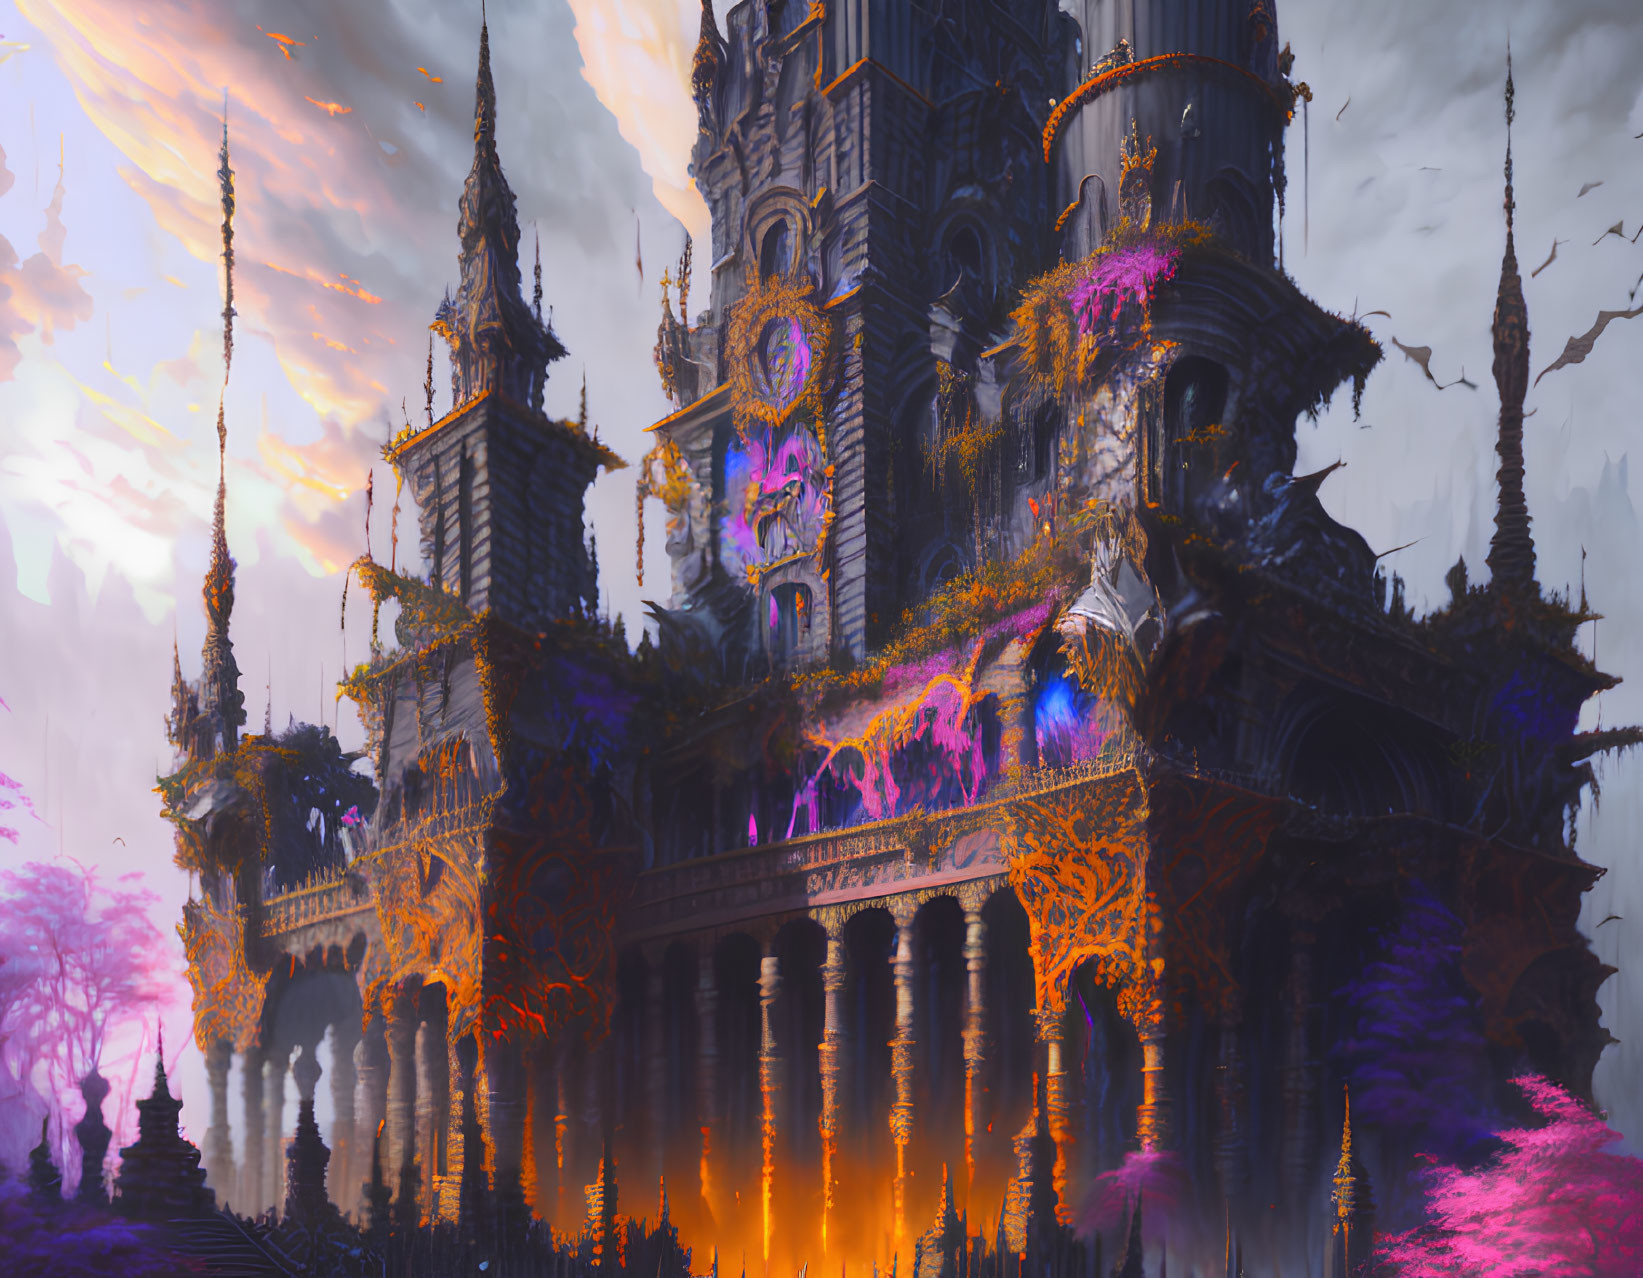 Gothic castle with ornate spires in surreal purple and orange landscape